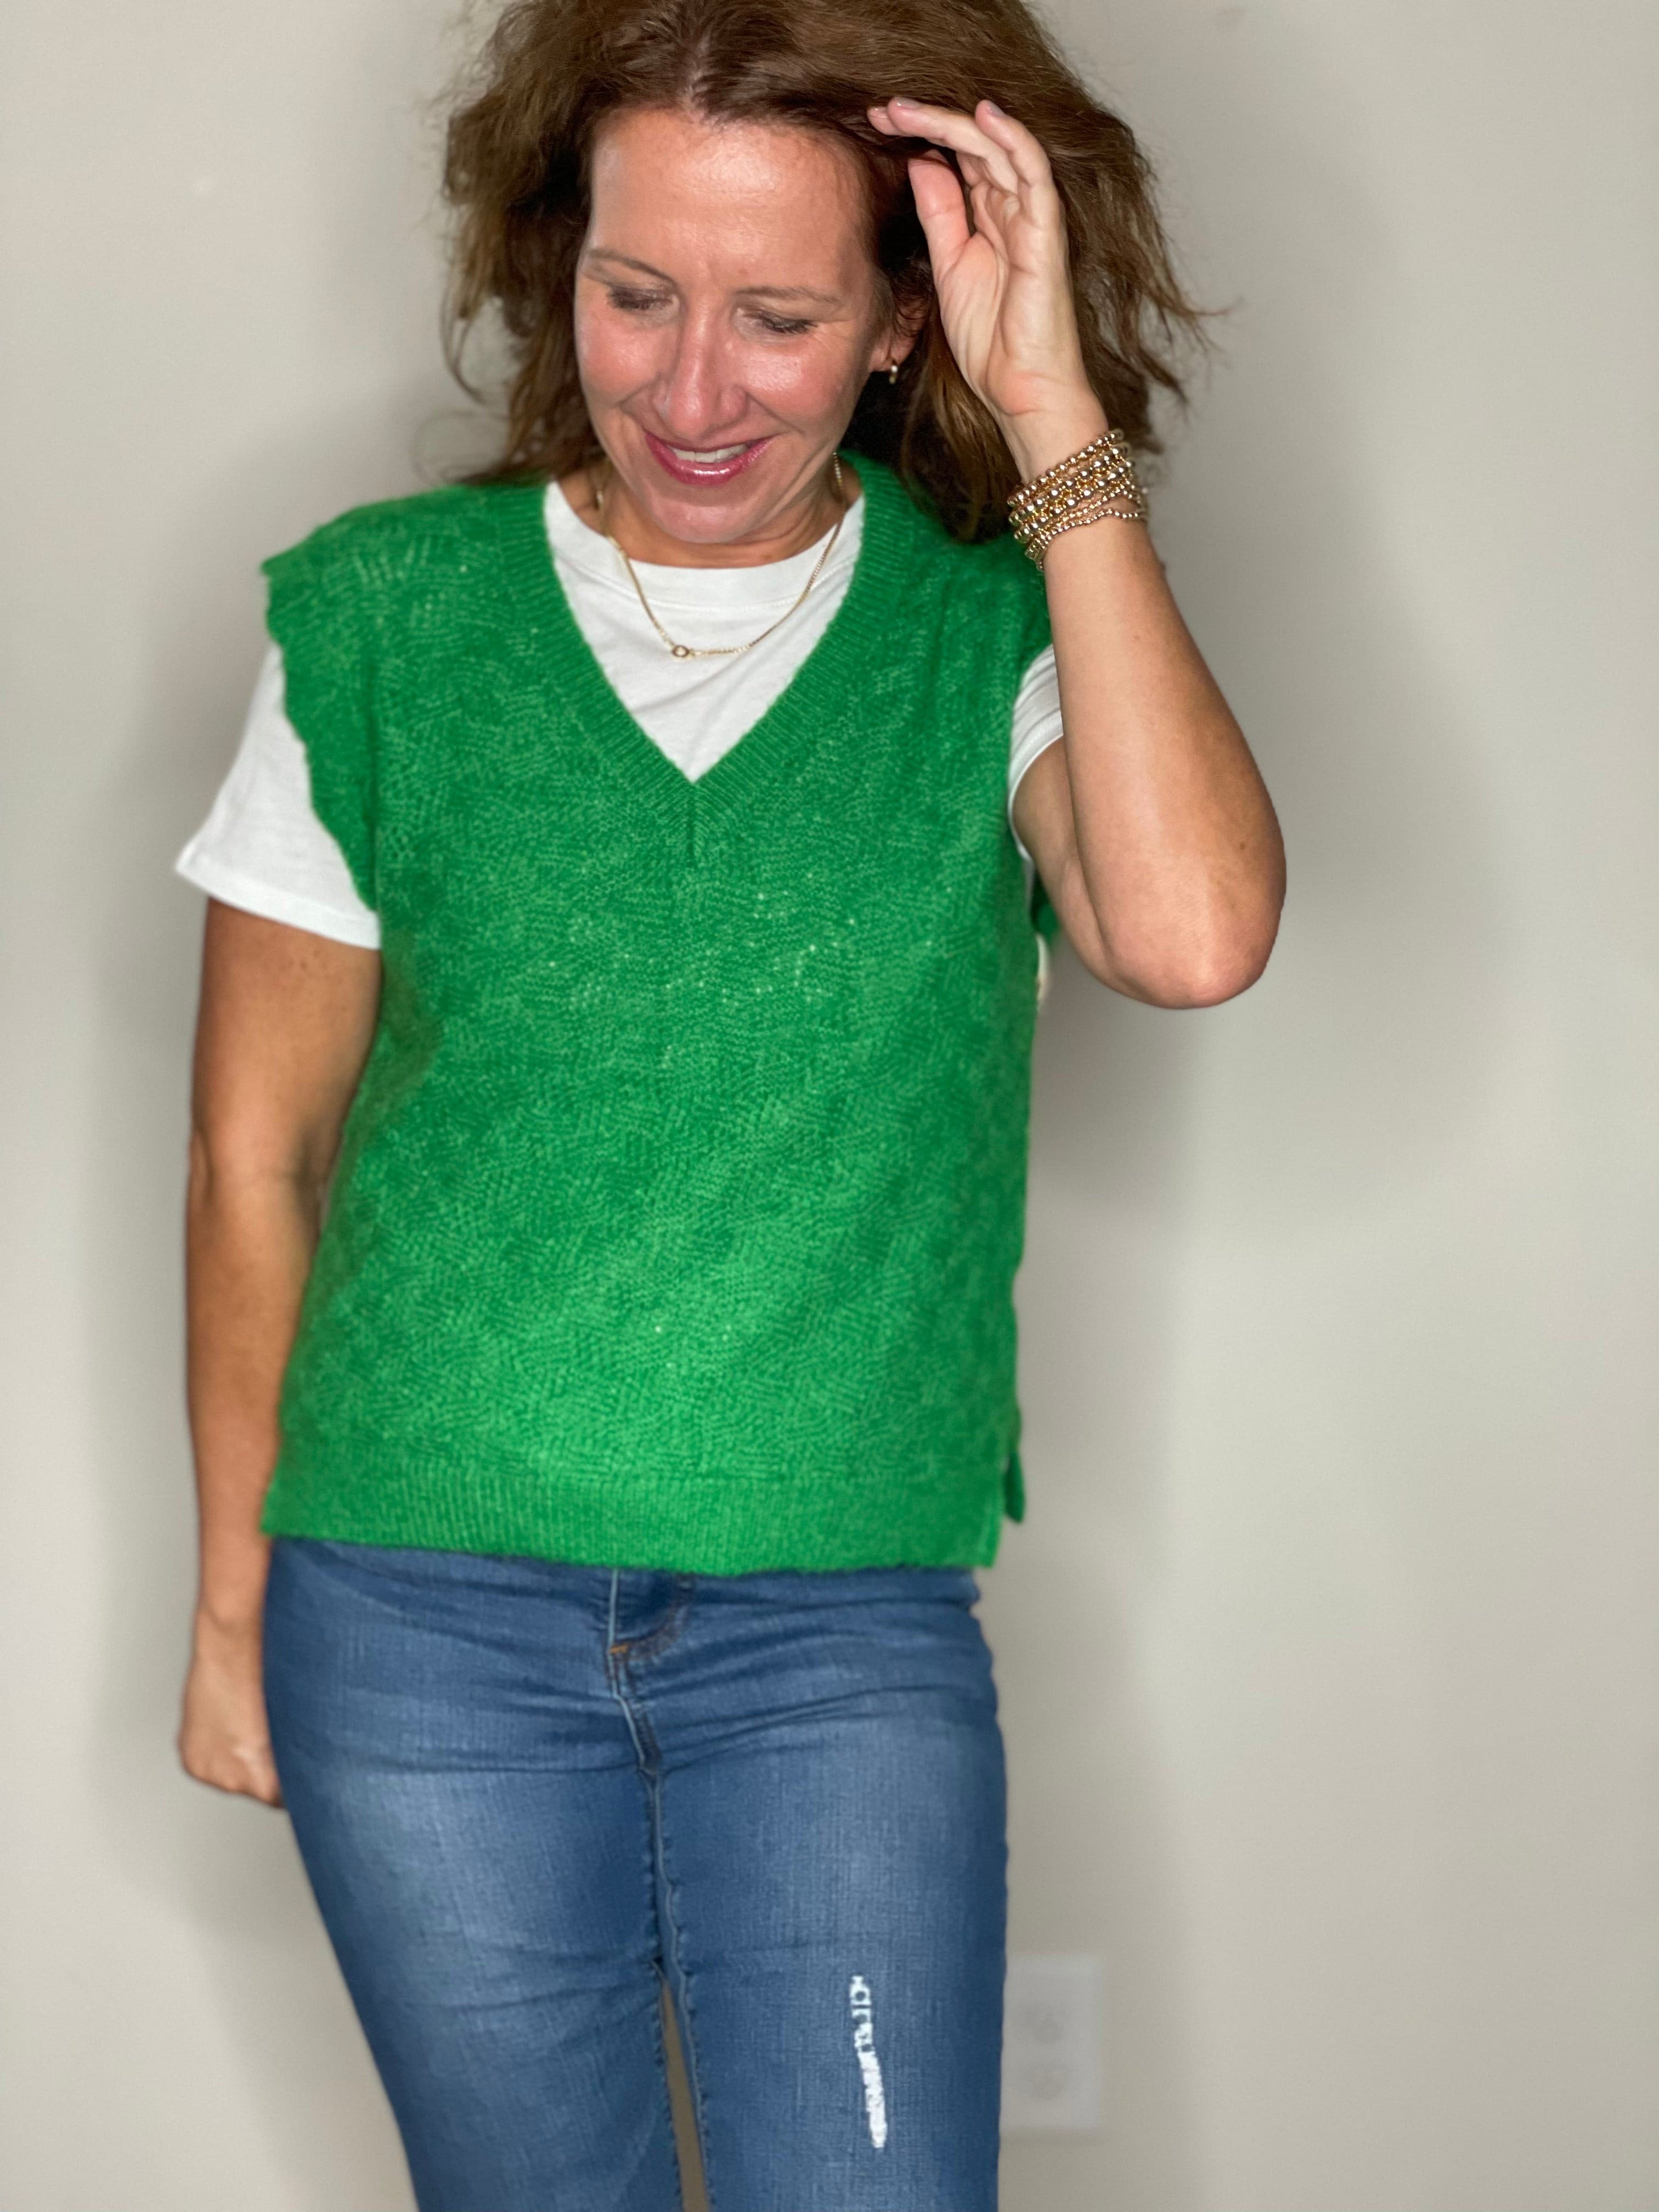 Neruda Top in Mighty Green.